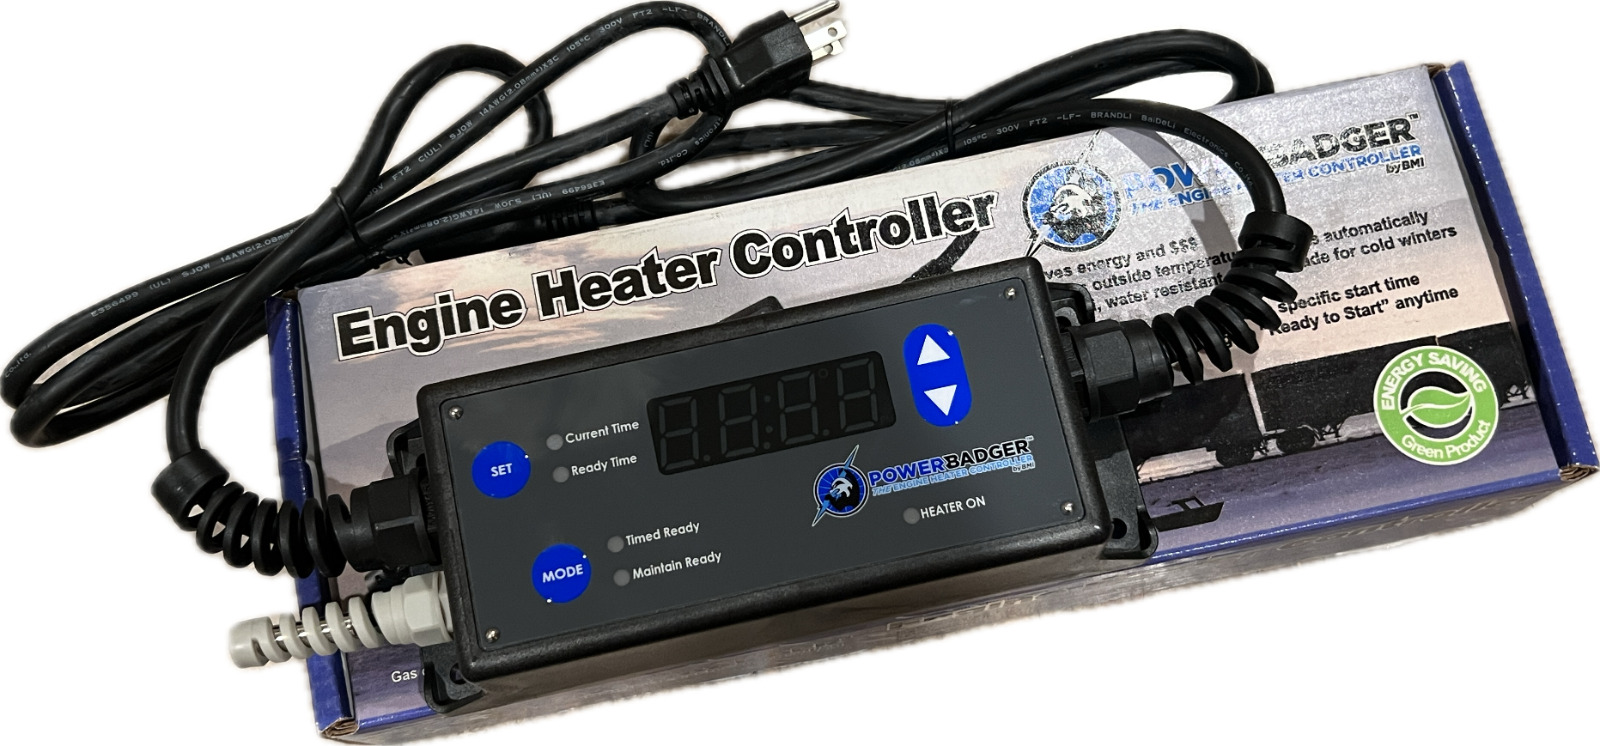 New Power Badger Engine Heater Controller 1800US by BMI